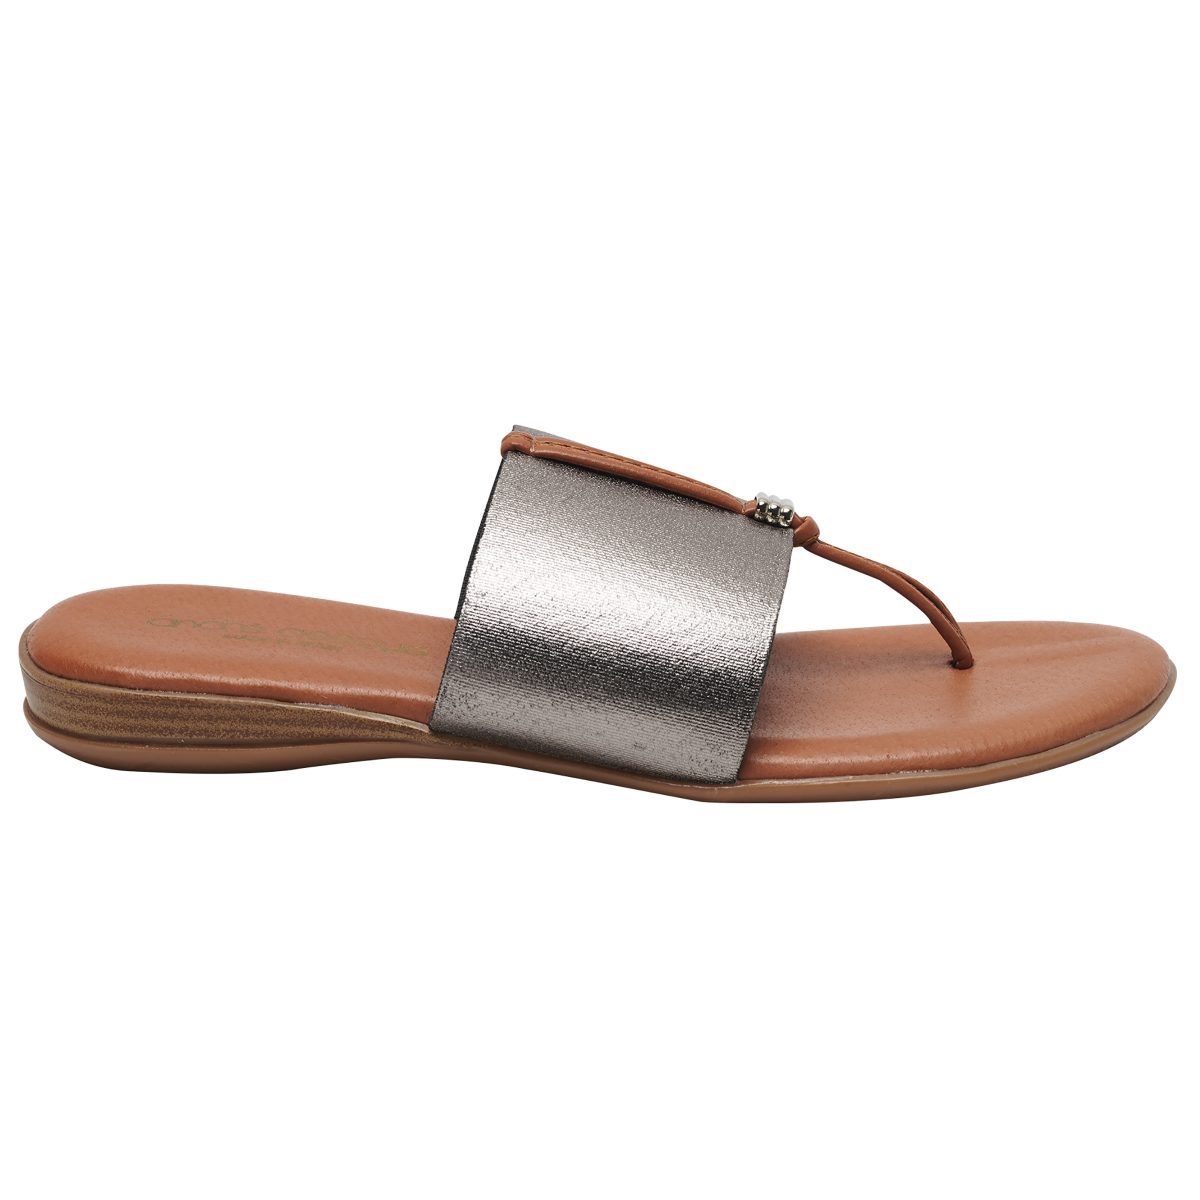 Andre Assous Nice thong style sandal with leather padded footbed and wide elastic band| Ooh! Ooh! Shoes woman's clothing and shoe boutique naples, charleston and mashpee